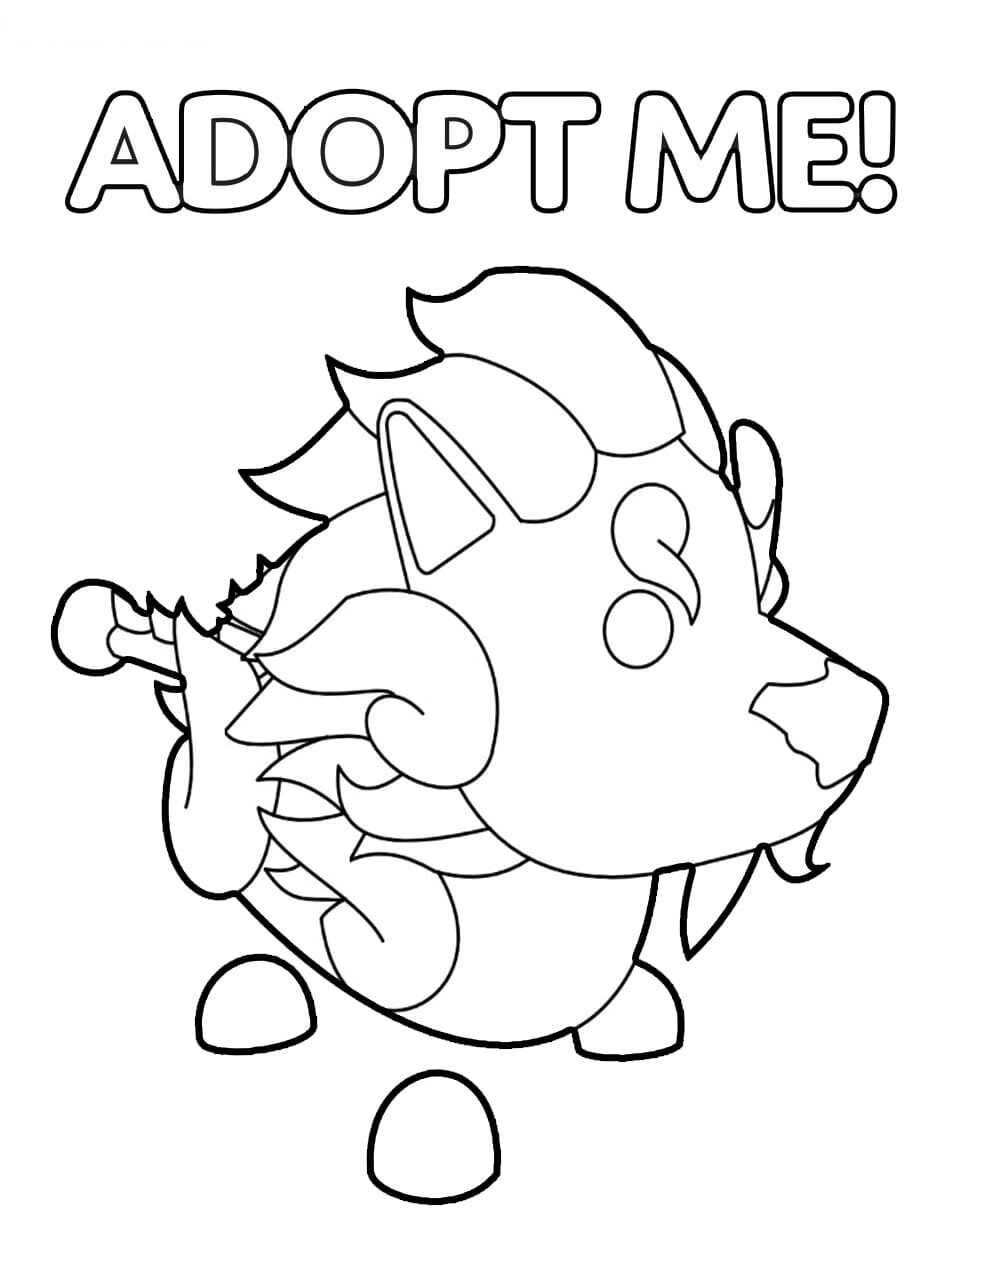 Guardian Lion in Adopt me glows horns, tail, mane, and paws Coloring Pages